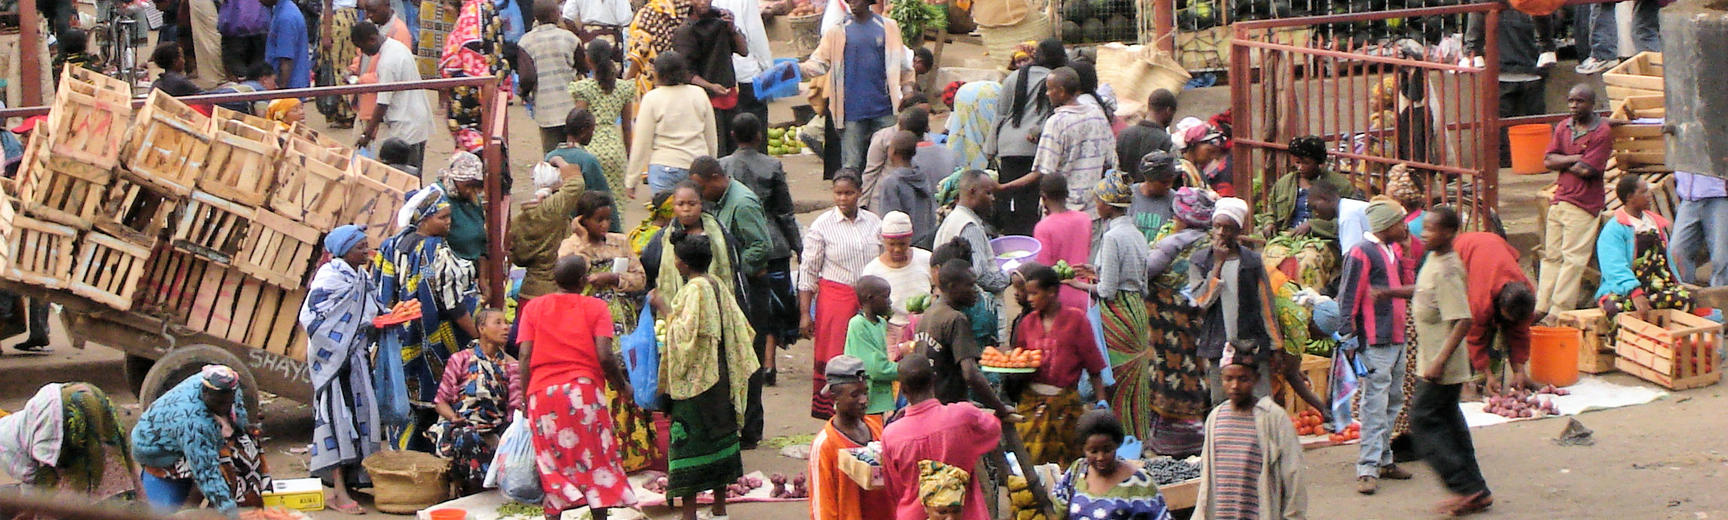 A very busy marketplace in Tanzania